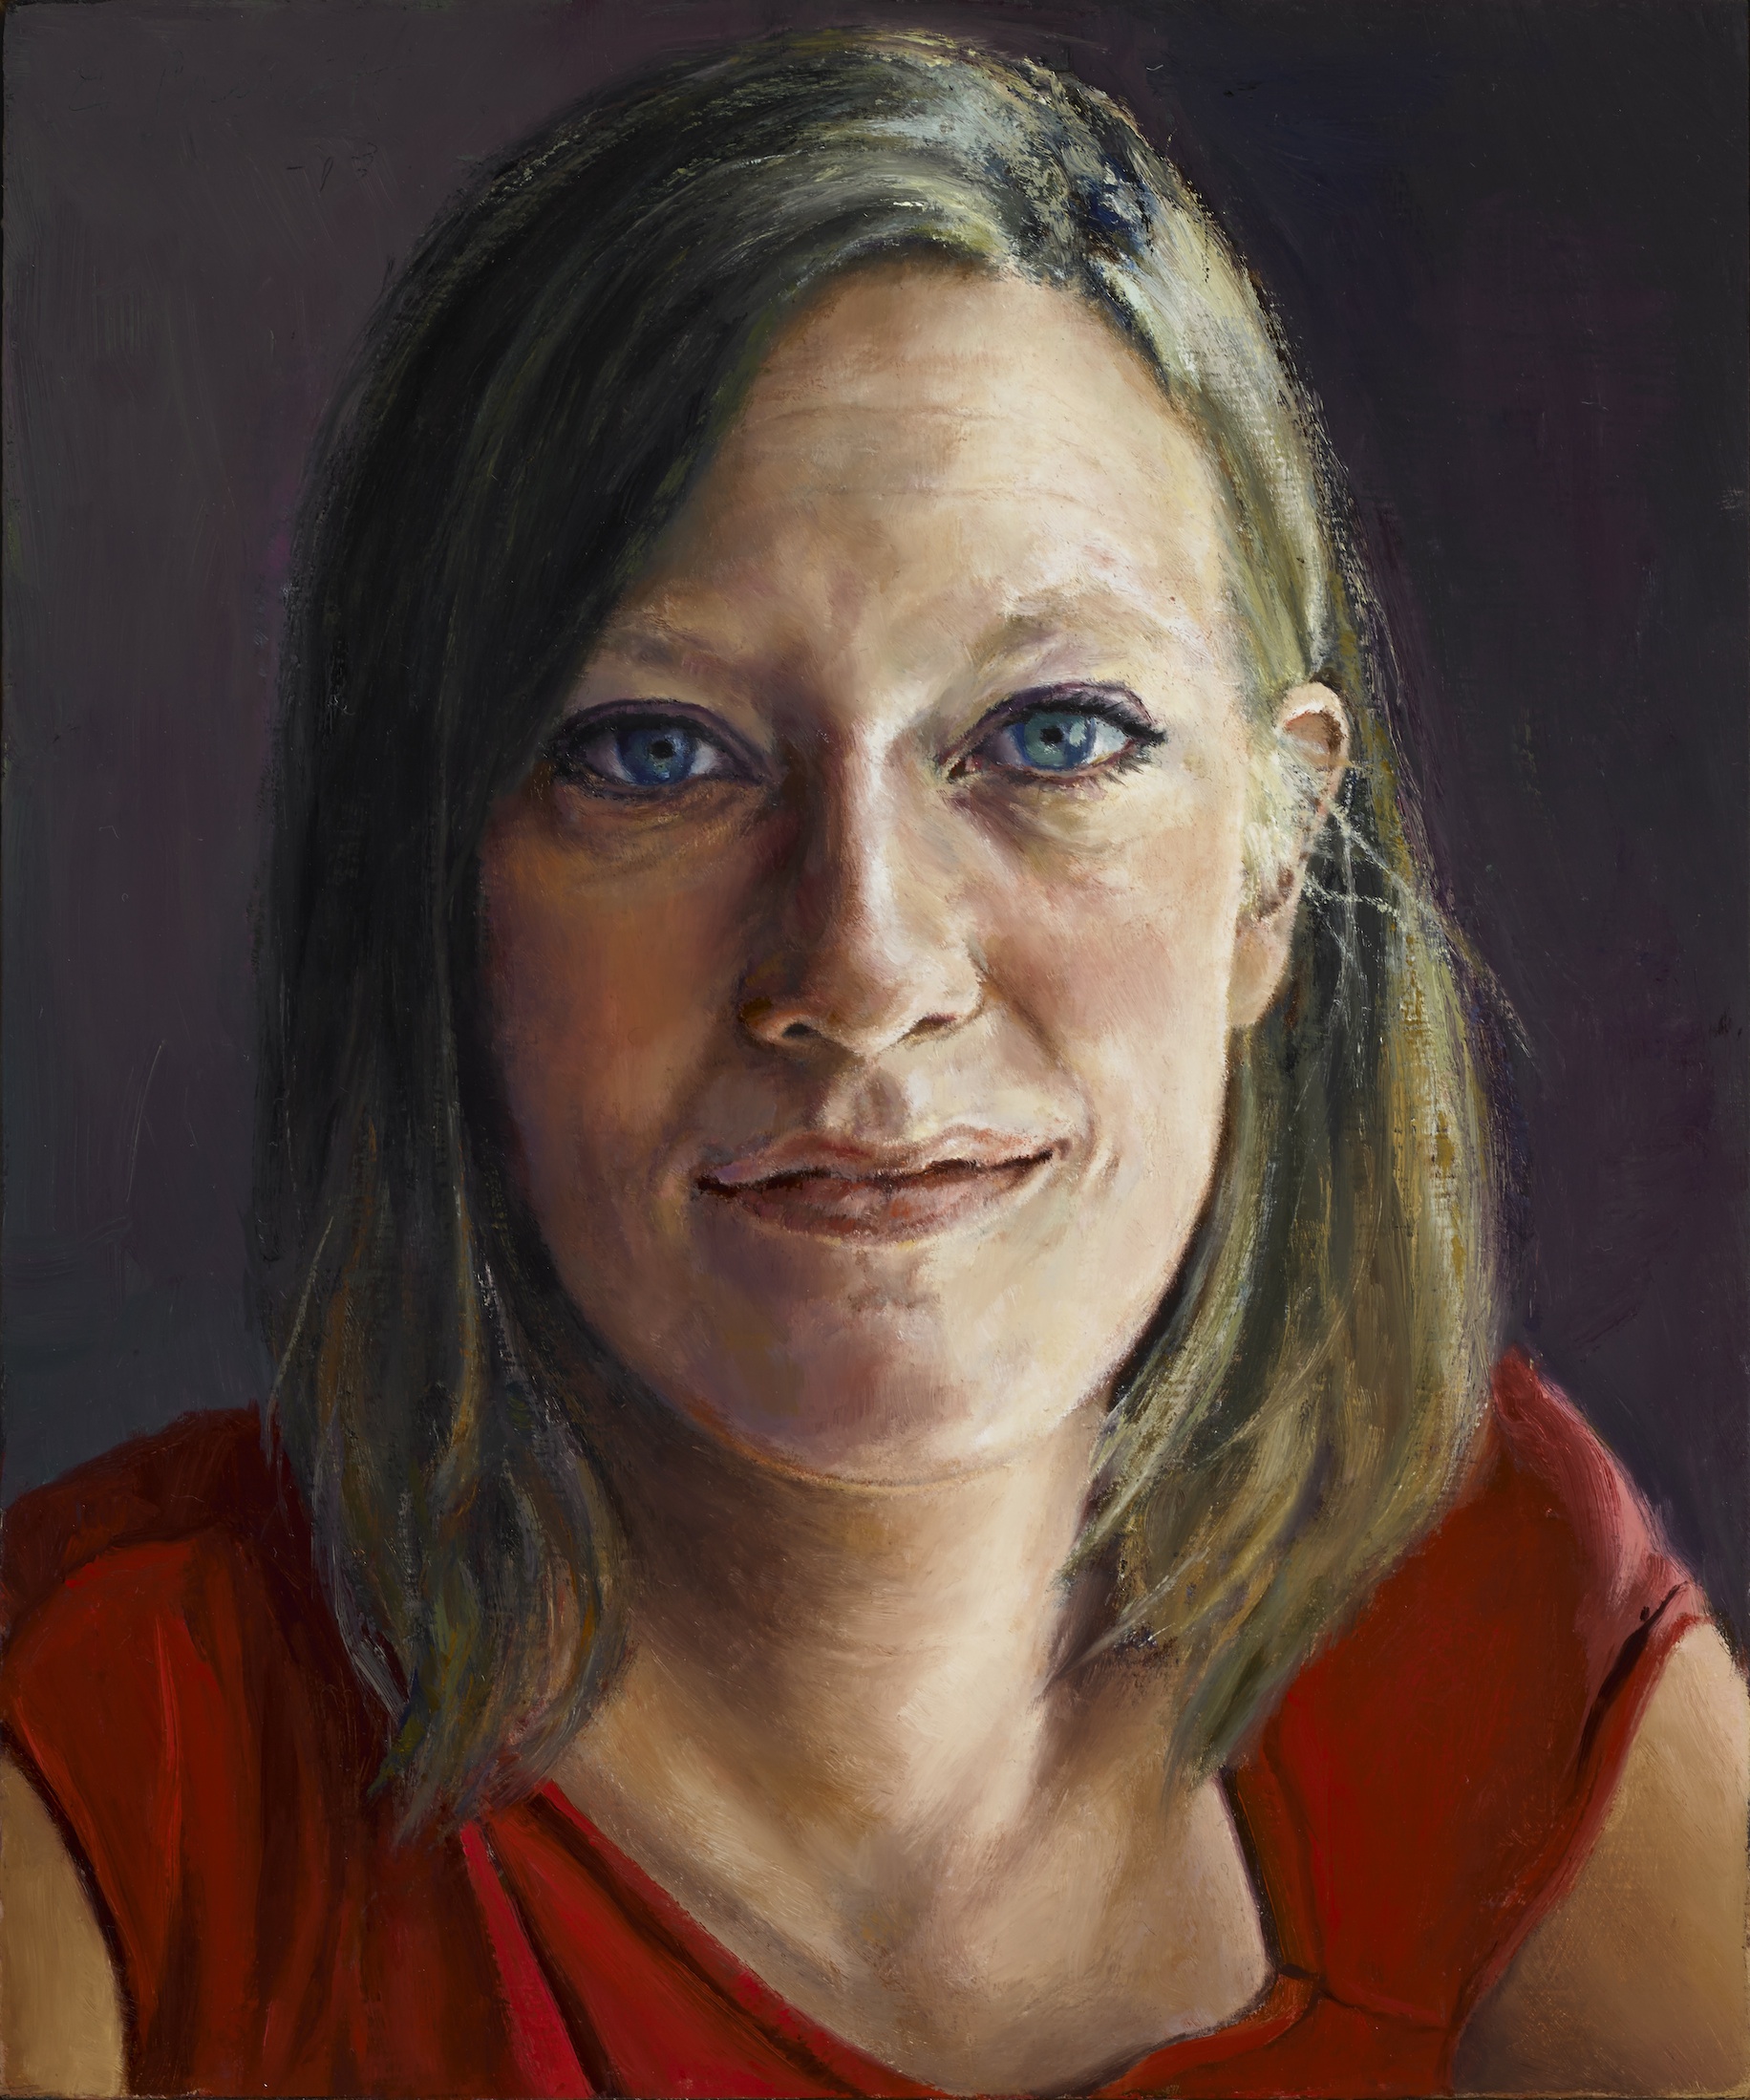   Grace , Oil on Wood Panel. 2003-2013, 12" x 10", Private Collection 